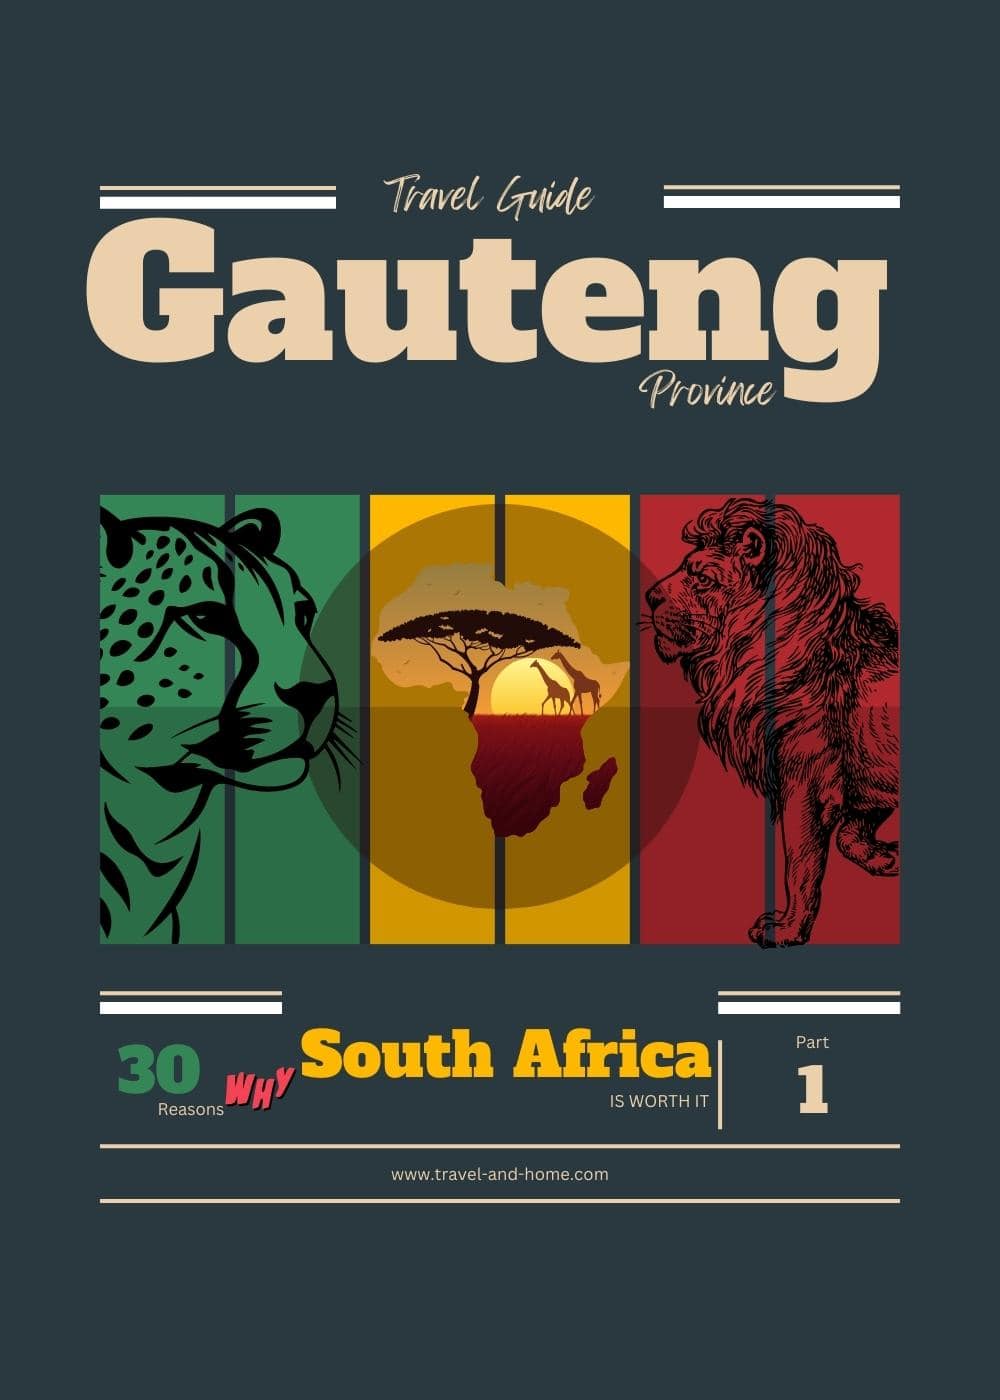 Reasons why South Africa is worth going to, Gauteng Province, travel guide min